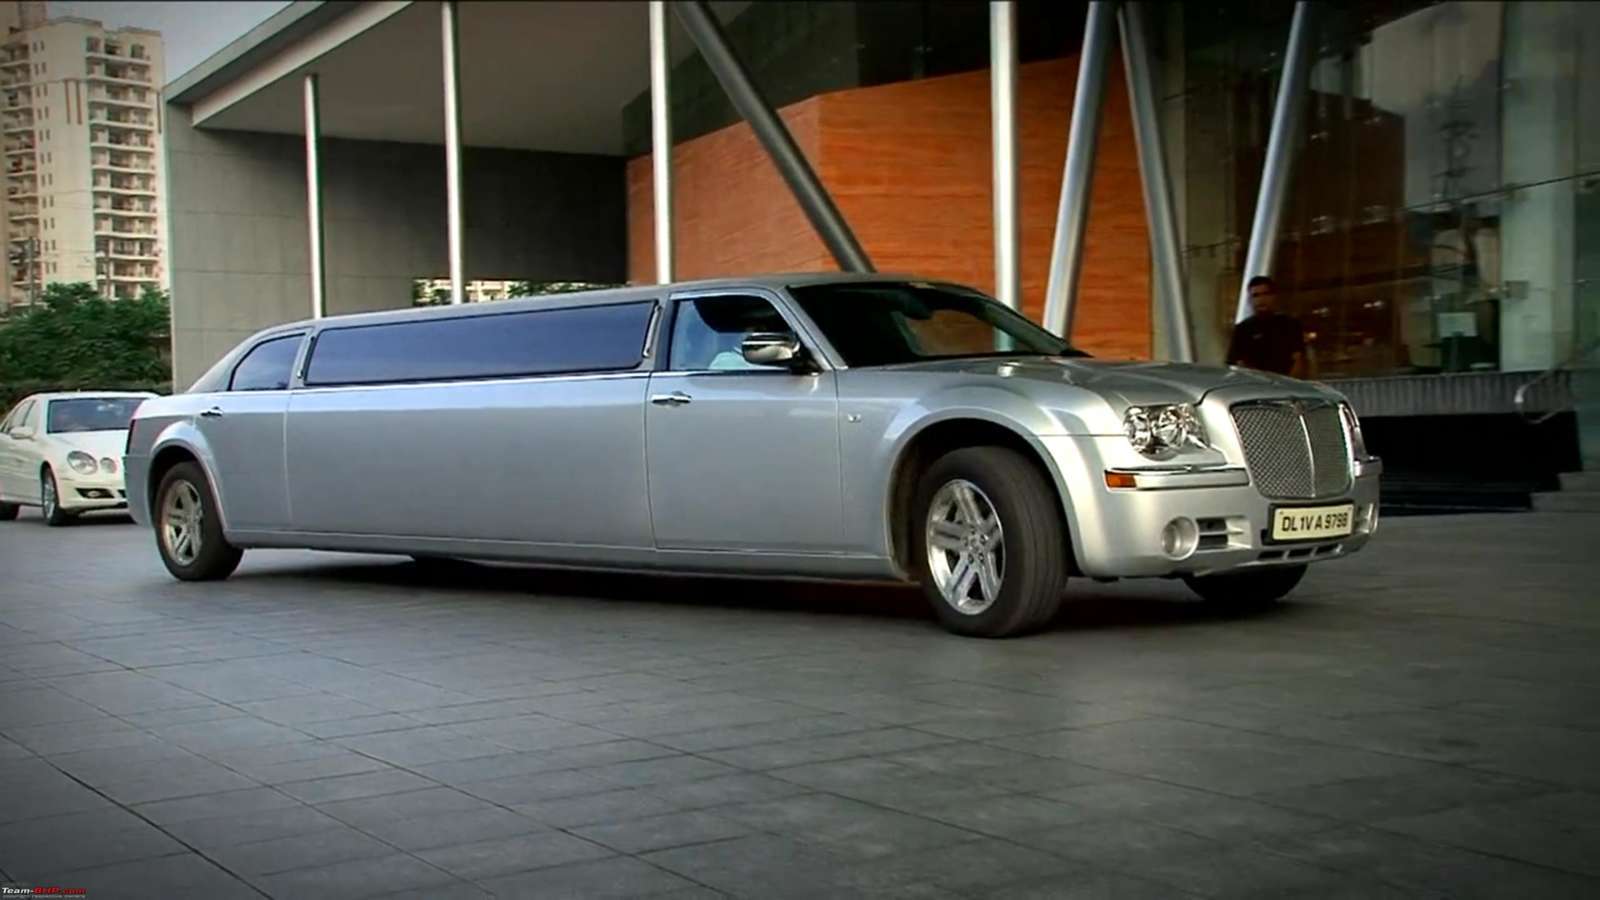 You Can Now Rent A Chrysler 300c Limousine For Rs Motoroids